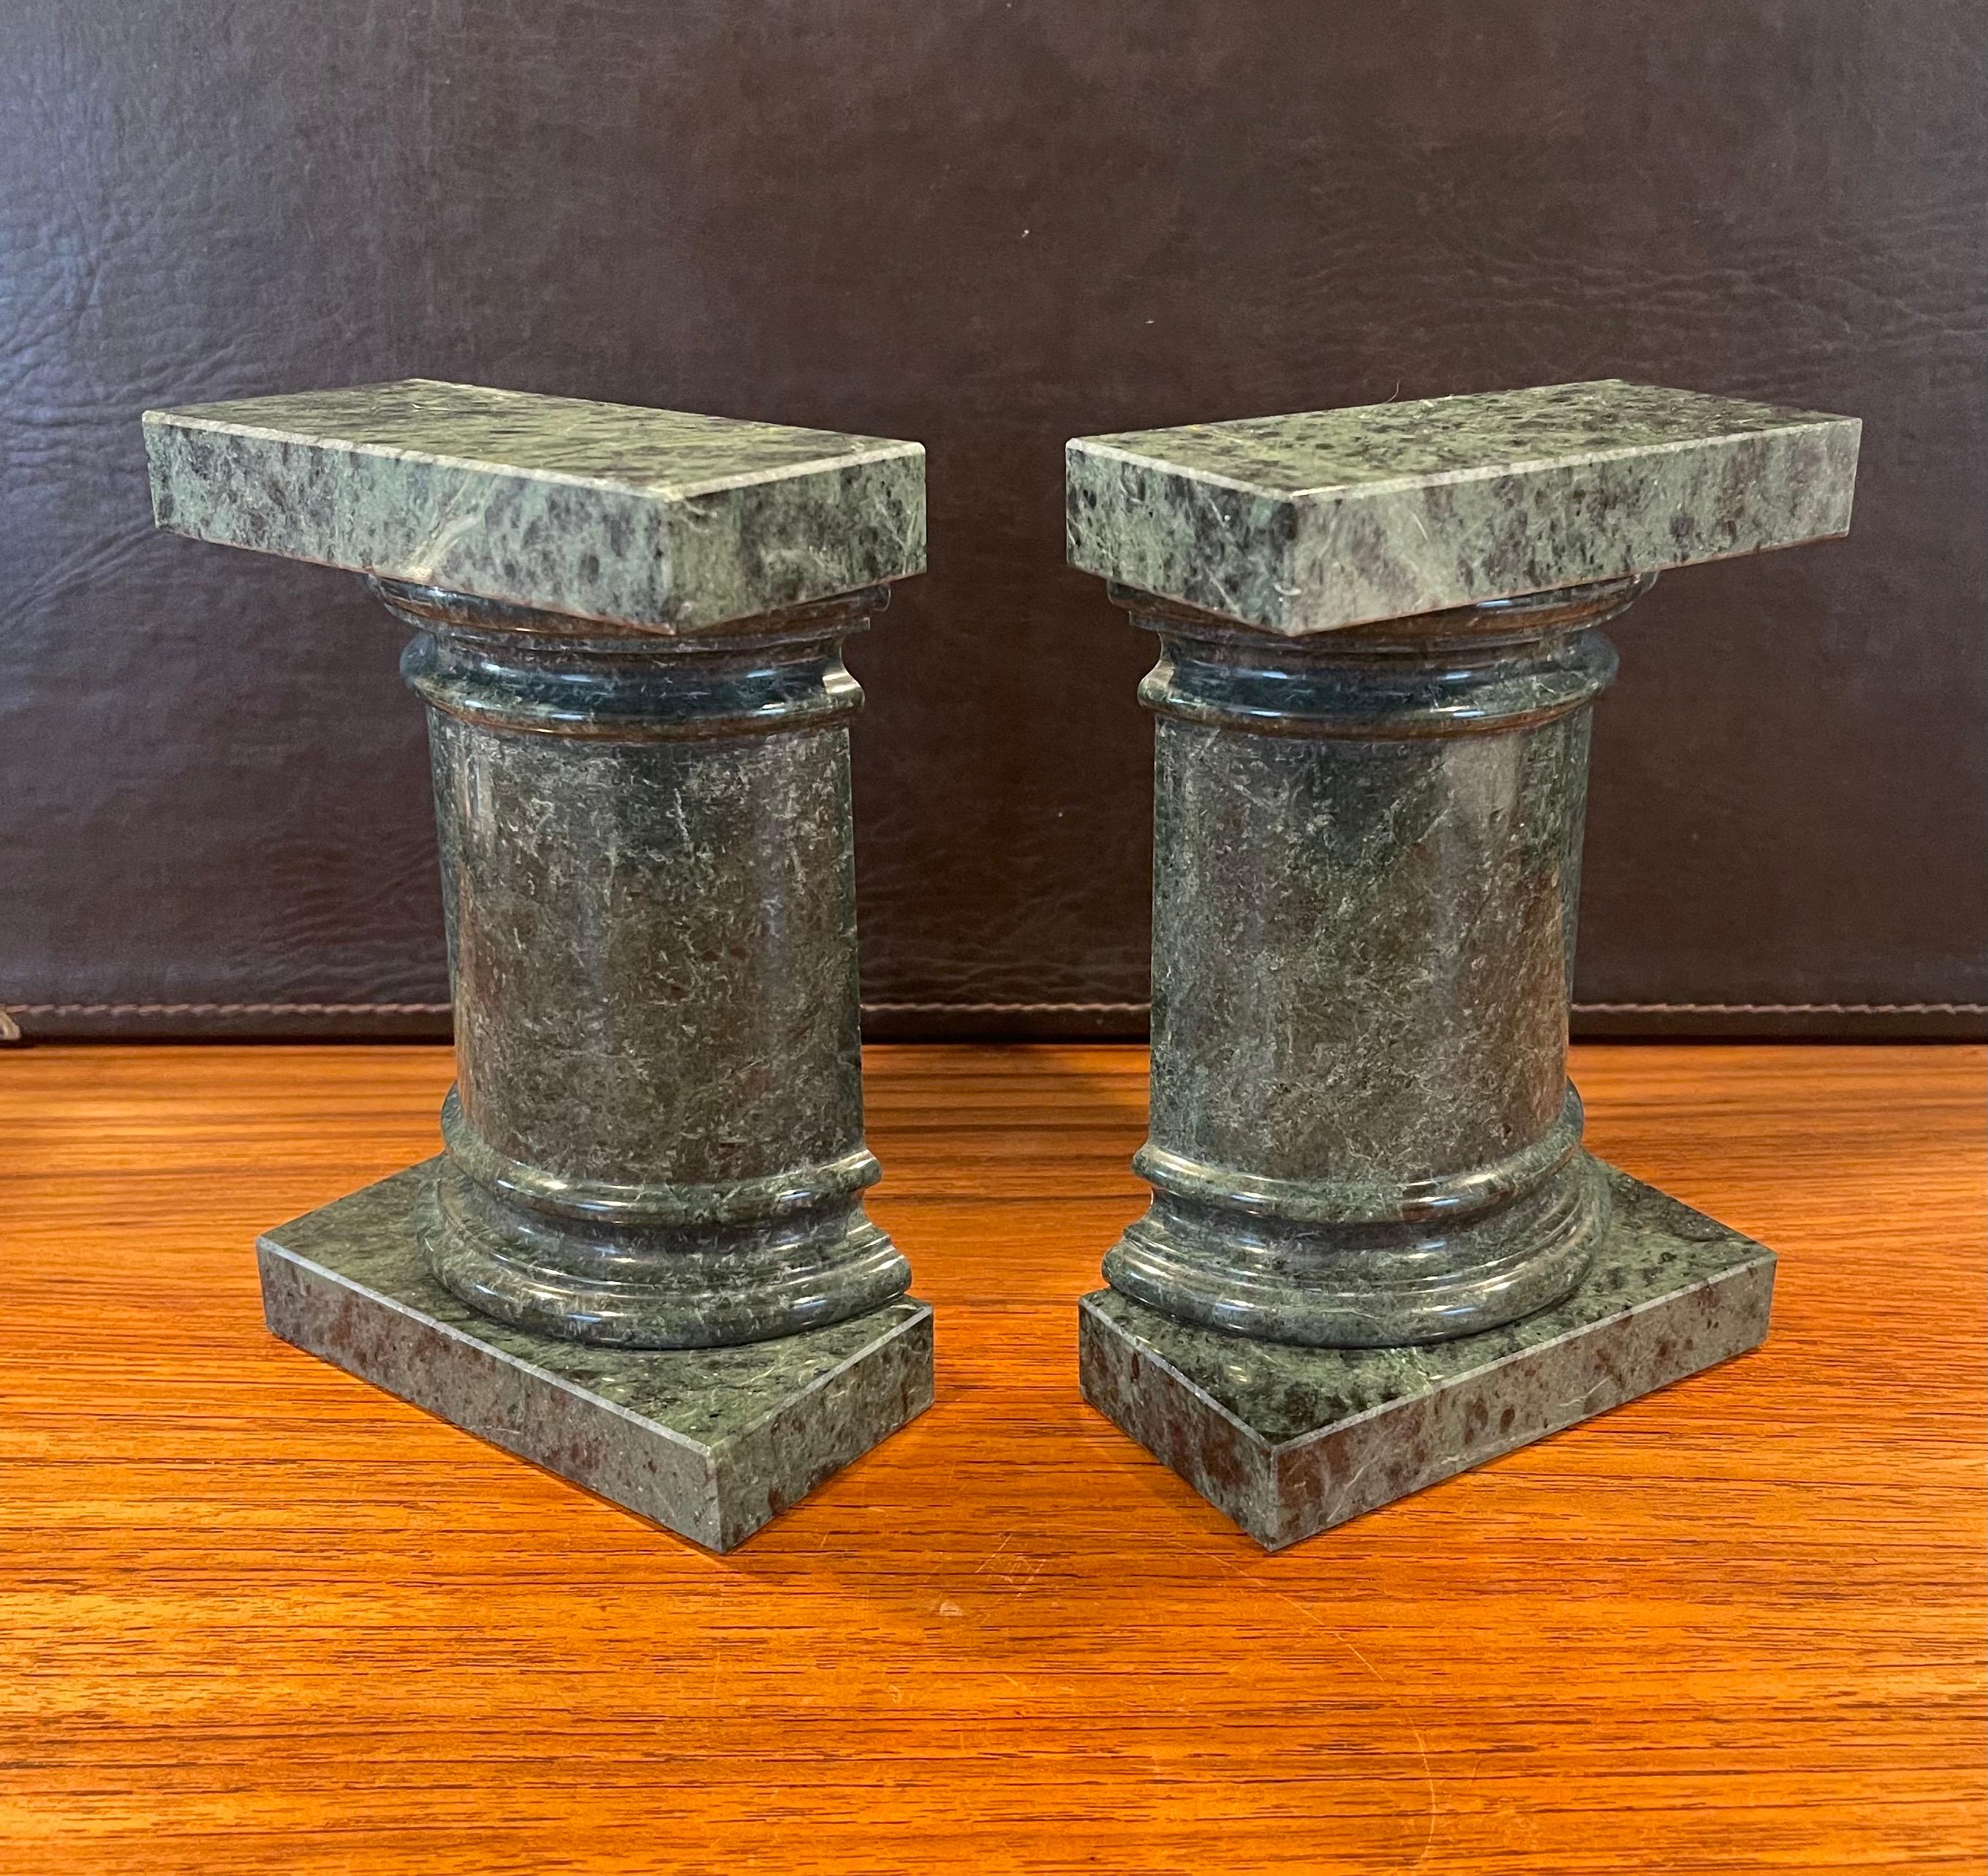 Beautiful pair of Roman column green marble bookends, circa 1970s. The marble is beautifully veined and in great condition and the bookends together create a Roman column form that is sculptural. The pair are in very good condition and measure 4.25